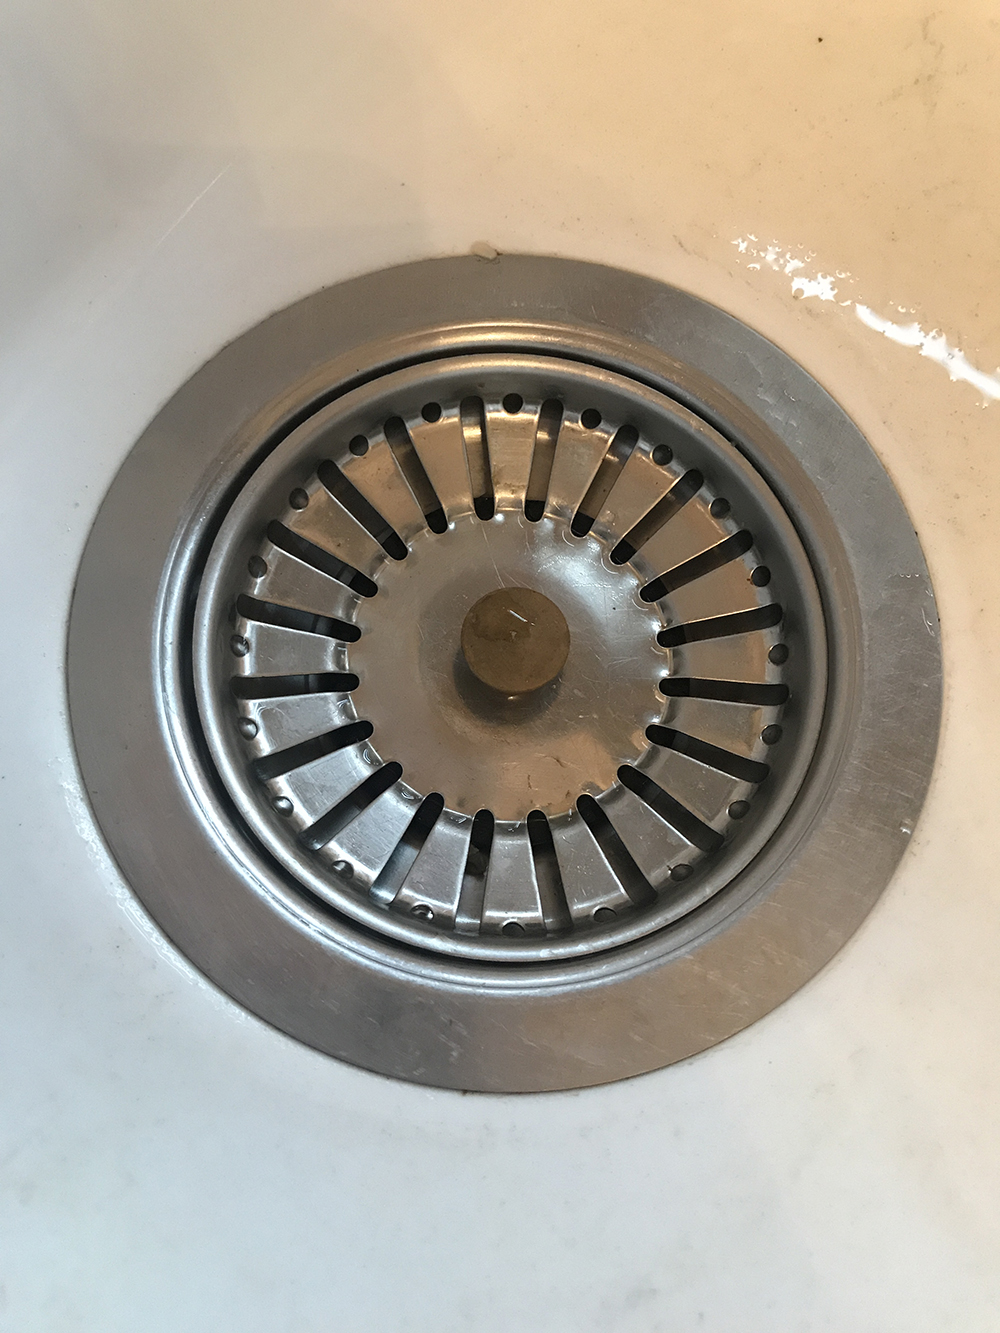 A photo of a sink with a plughole screen.